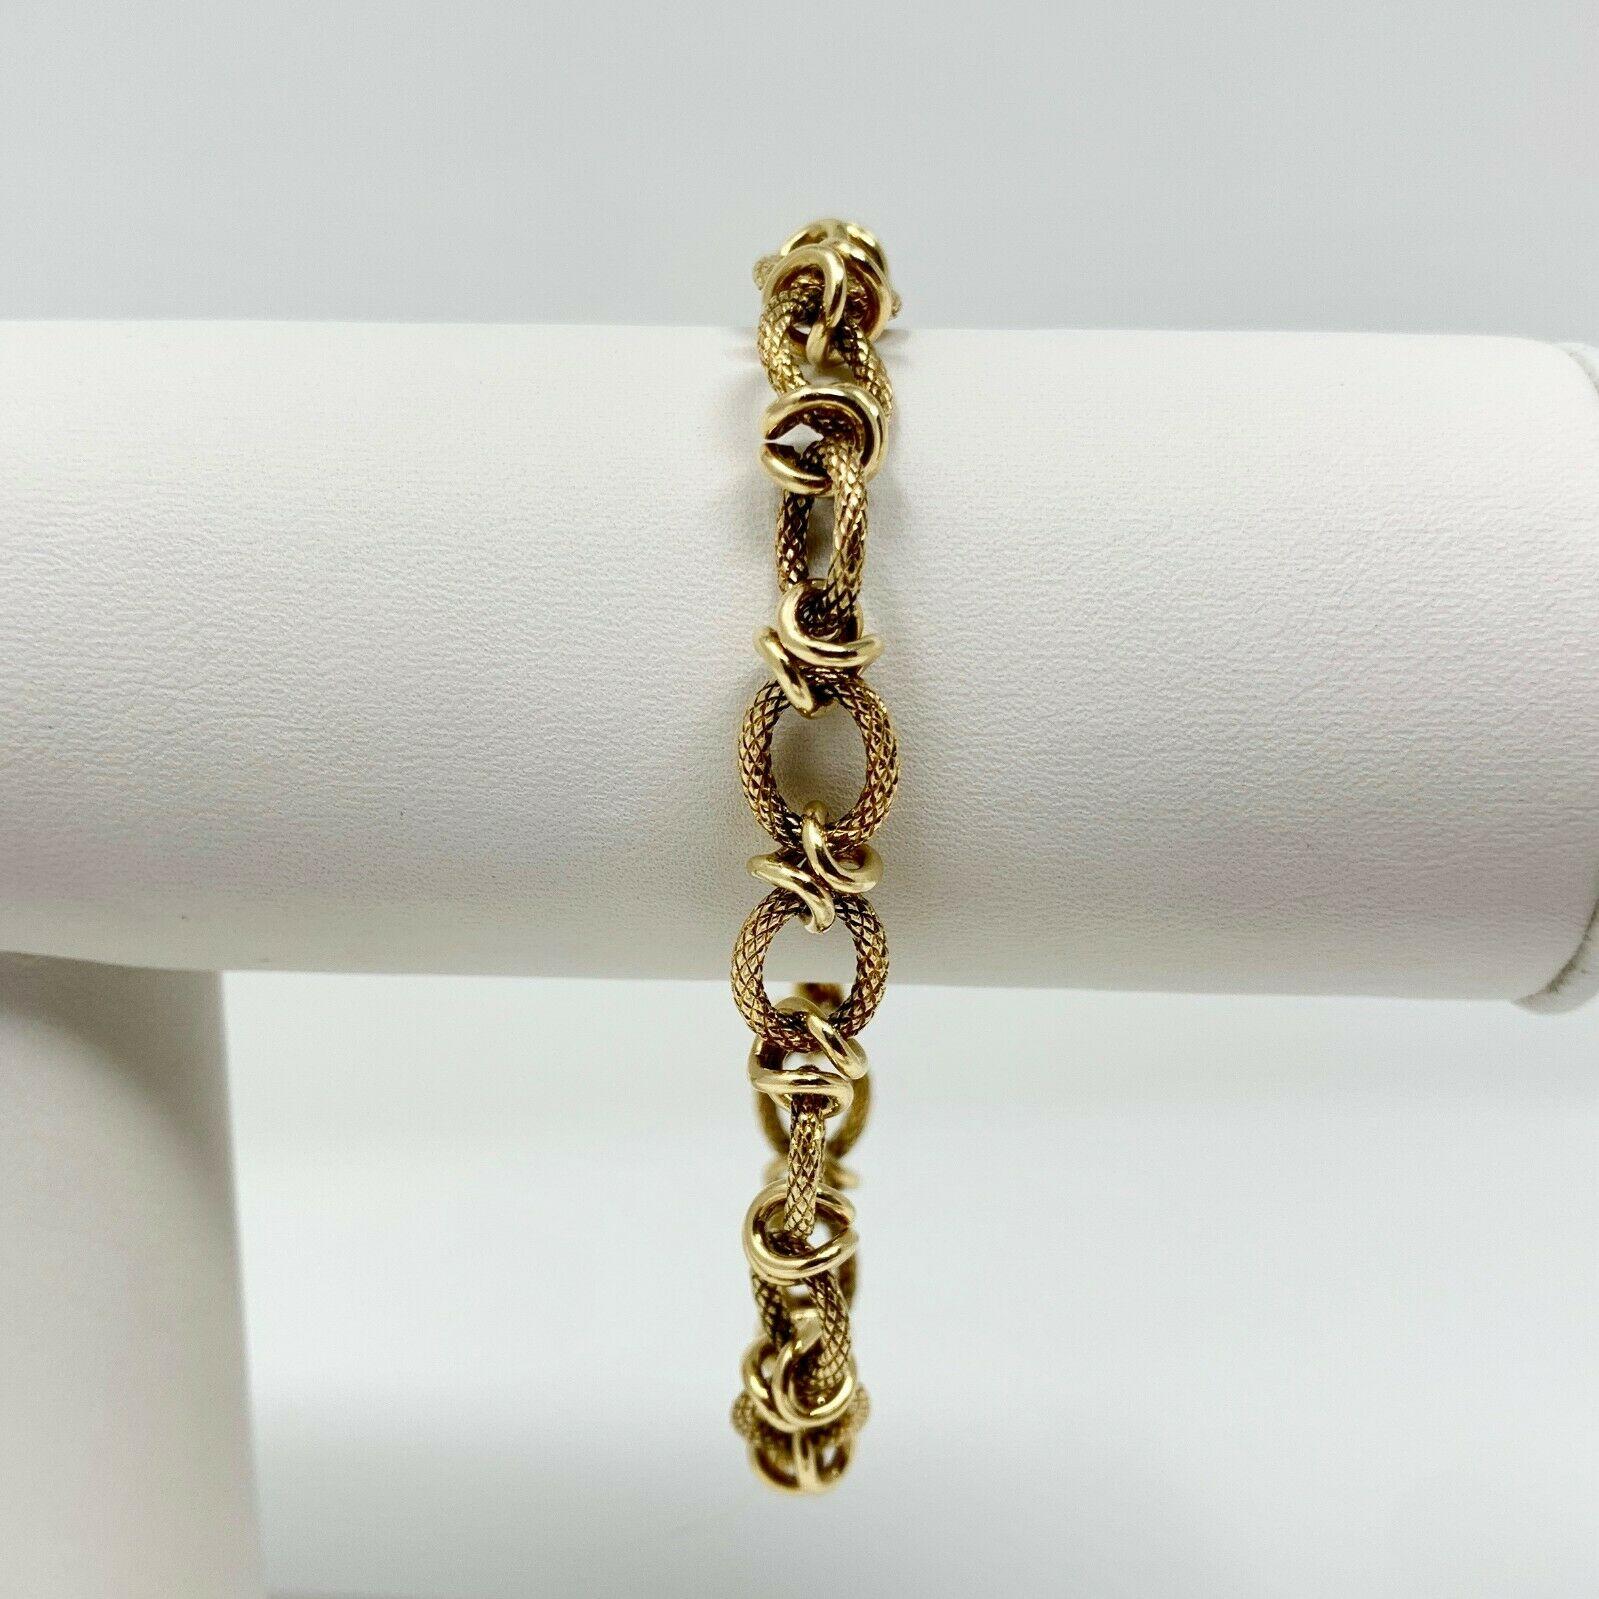 14k Yellow Gold Vintage Fancy Textured Cable Link Chain Bracelet 7.5 Inches

Condition:  Excellent Condition, Professionally Cleaned and Polished
Metal:  14k Gold (Marked, and Professionally Tested)
Weight:  19.7g
Length:  7.5 Inches
Width: 